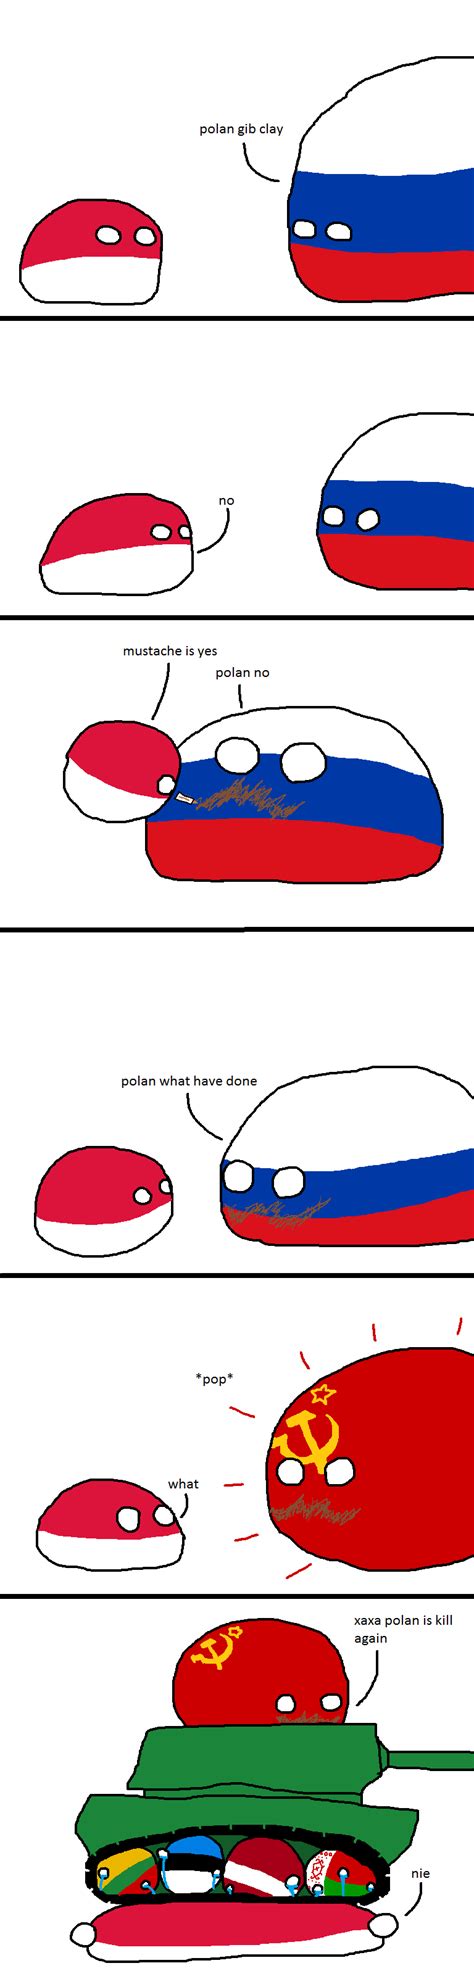 This wiki exists since january 10, 2010 and since then, it has been an encyclopedia for all the polandballers.* Poland beats Russia : polandball